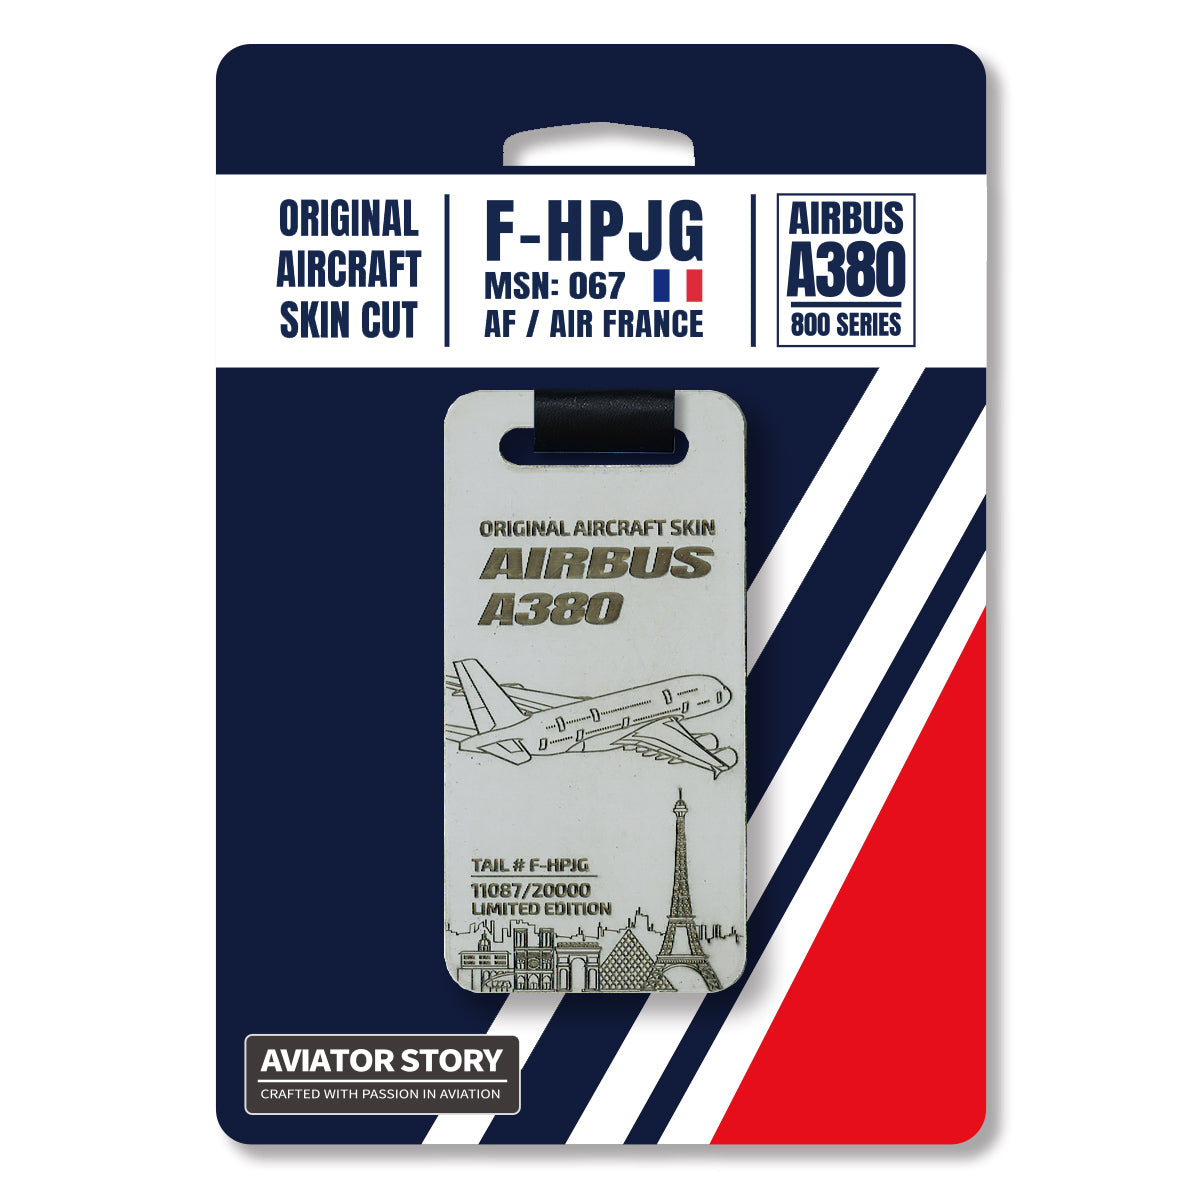 Air France Airbus A380 original aircraft skin plane tag. F-HPJG. Aviation tag. Best gift for pilot crew avgeek and travel lover.Made from authentic aircraft skin, handmade aviation tags from skin of plane.